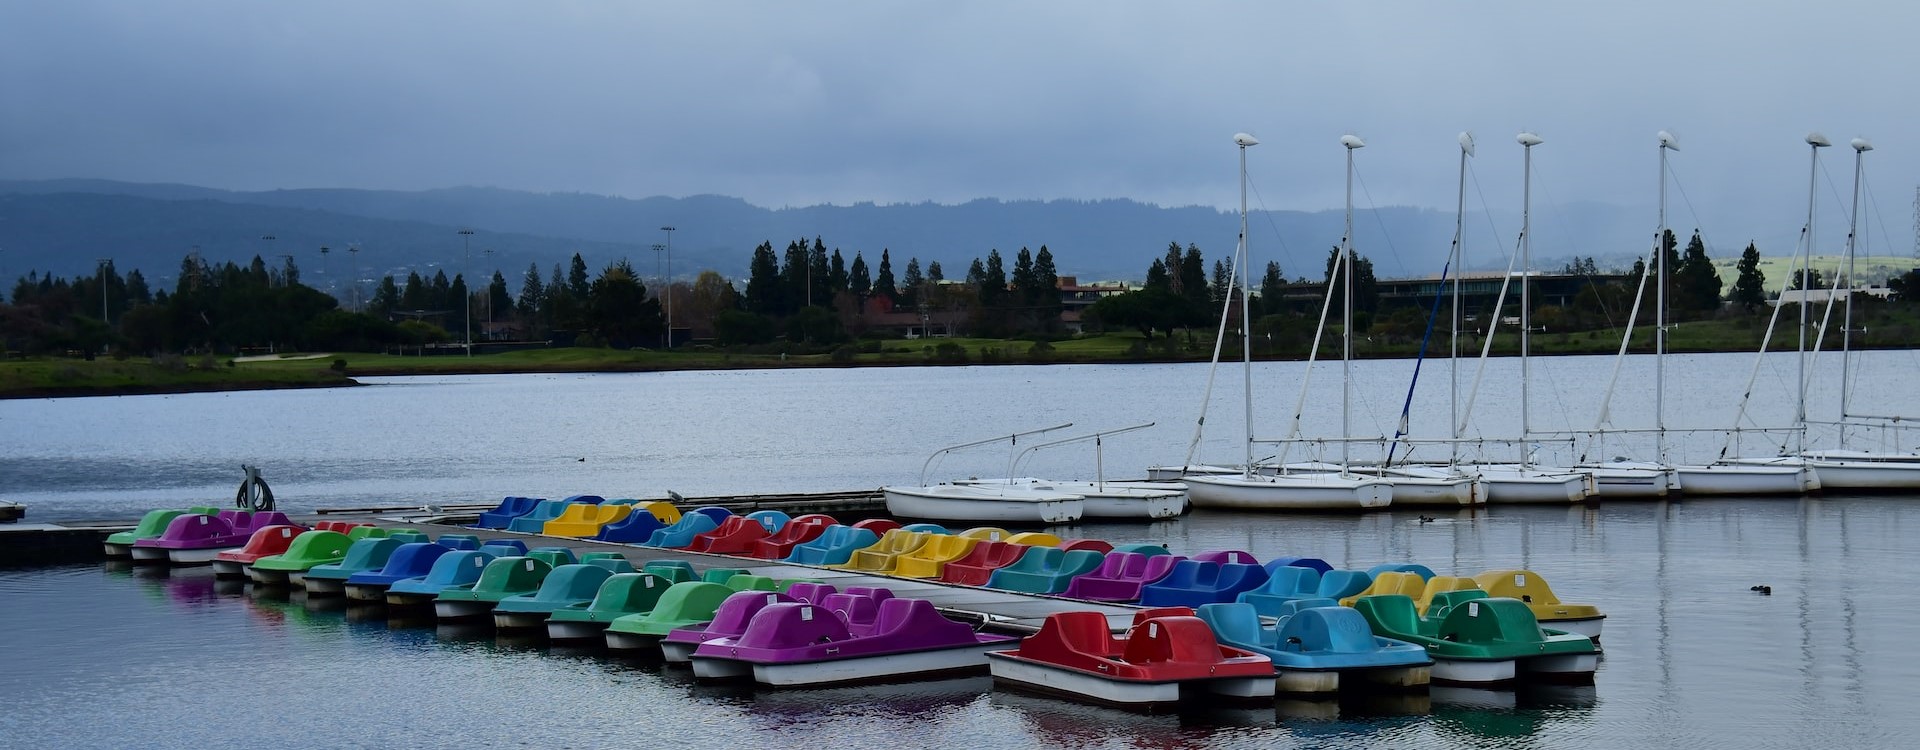 Paddle boats | Breast Cancer Car Donations